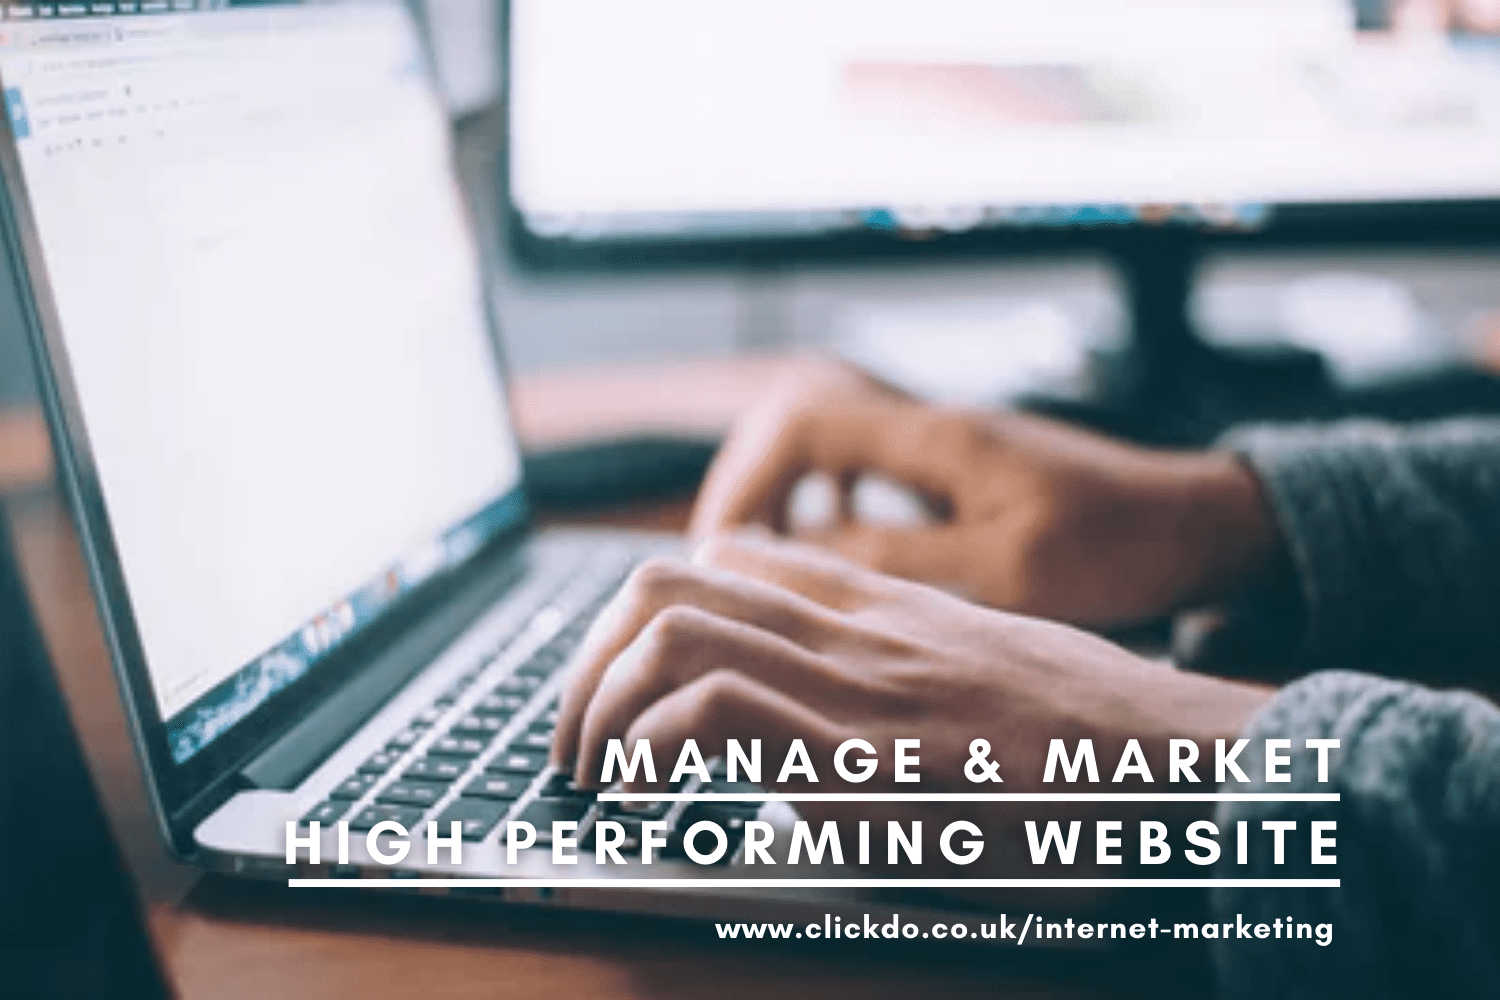 How To Manage & Market A High Performing Website For Your Business